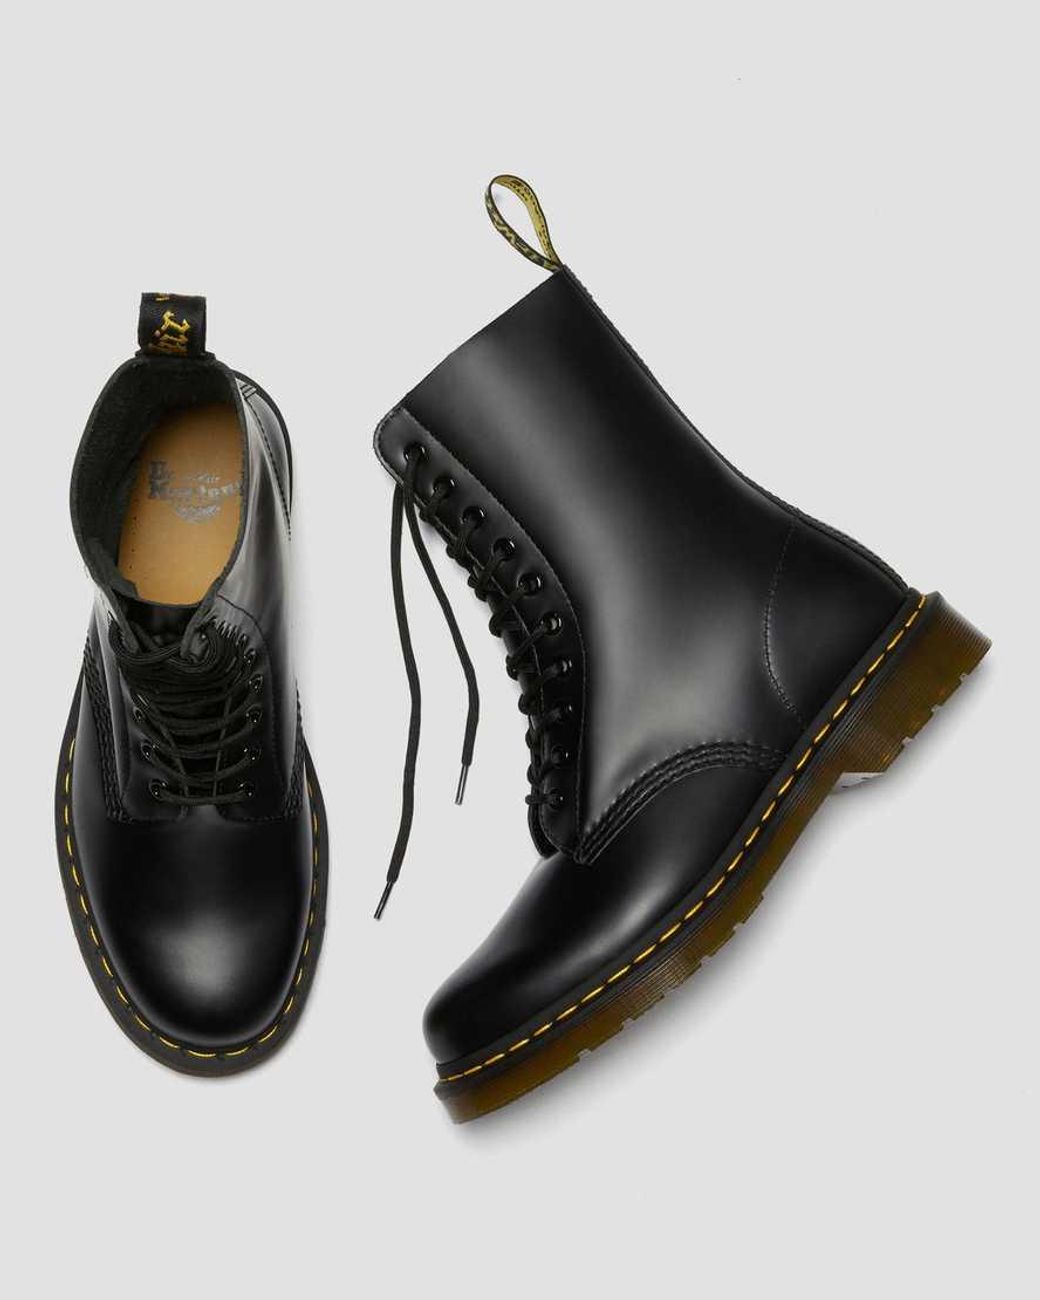 Dr. Martens Unisex 1490 Smooth Leather Mid Calf Boots Black | Lyst